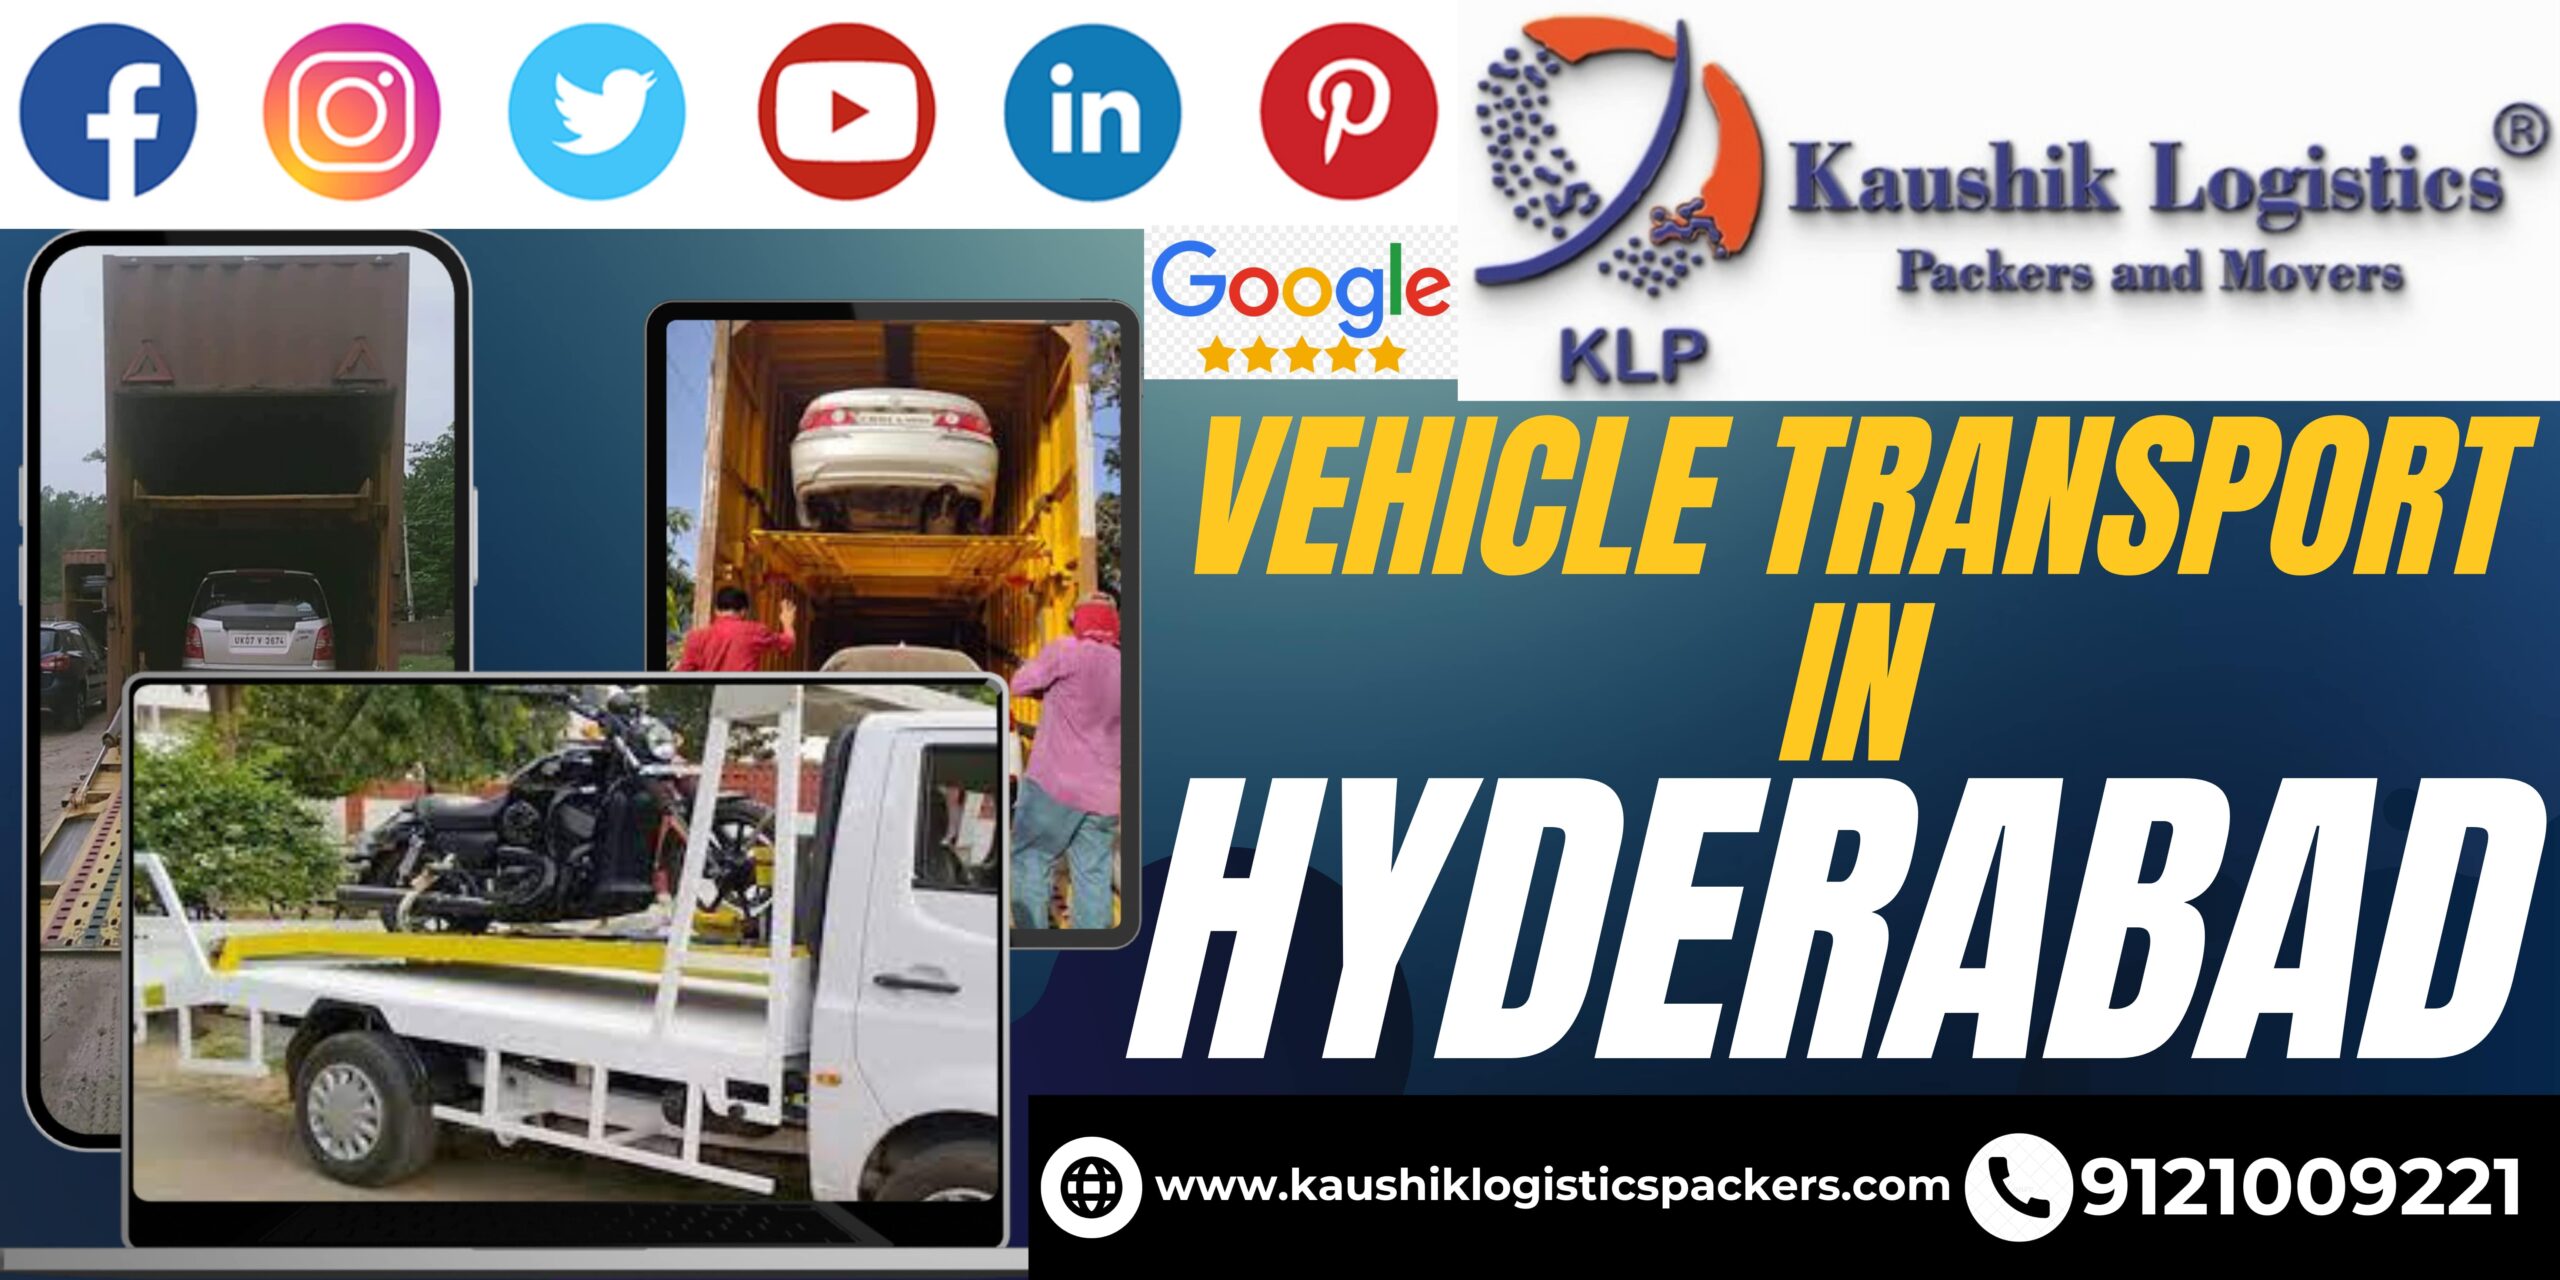 Packers and Movers Hyderabad